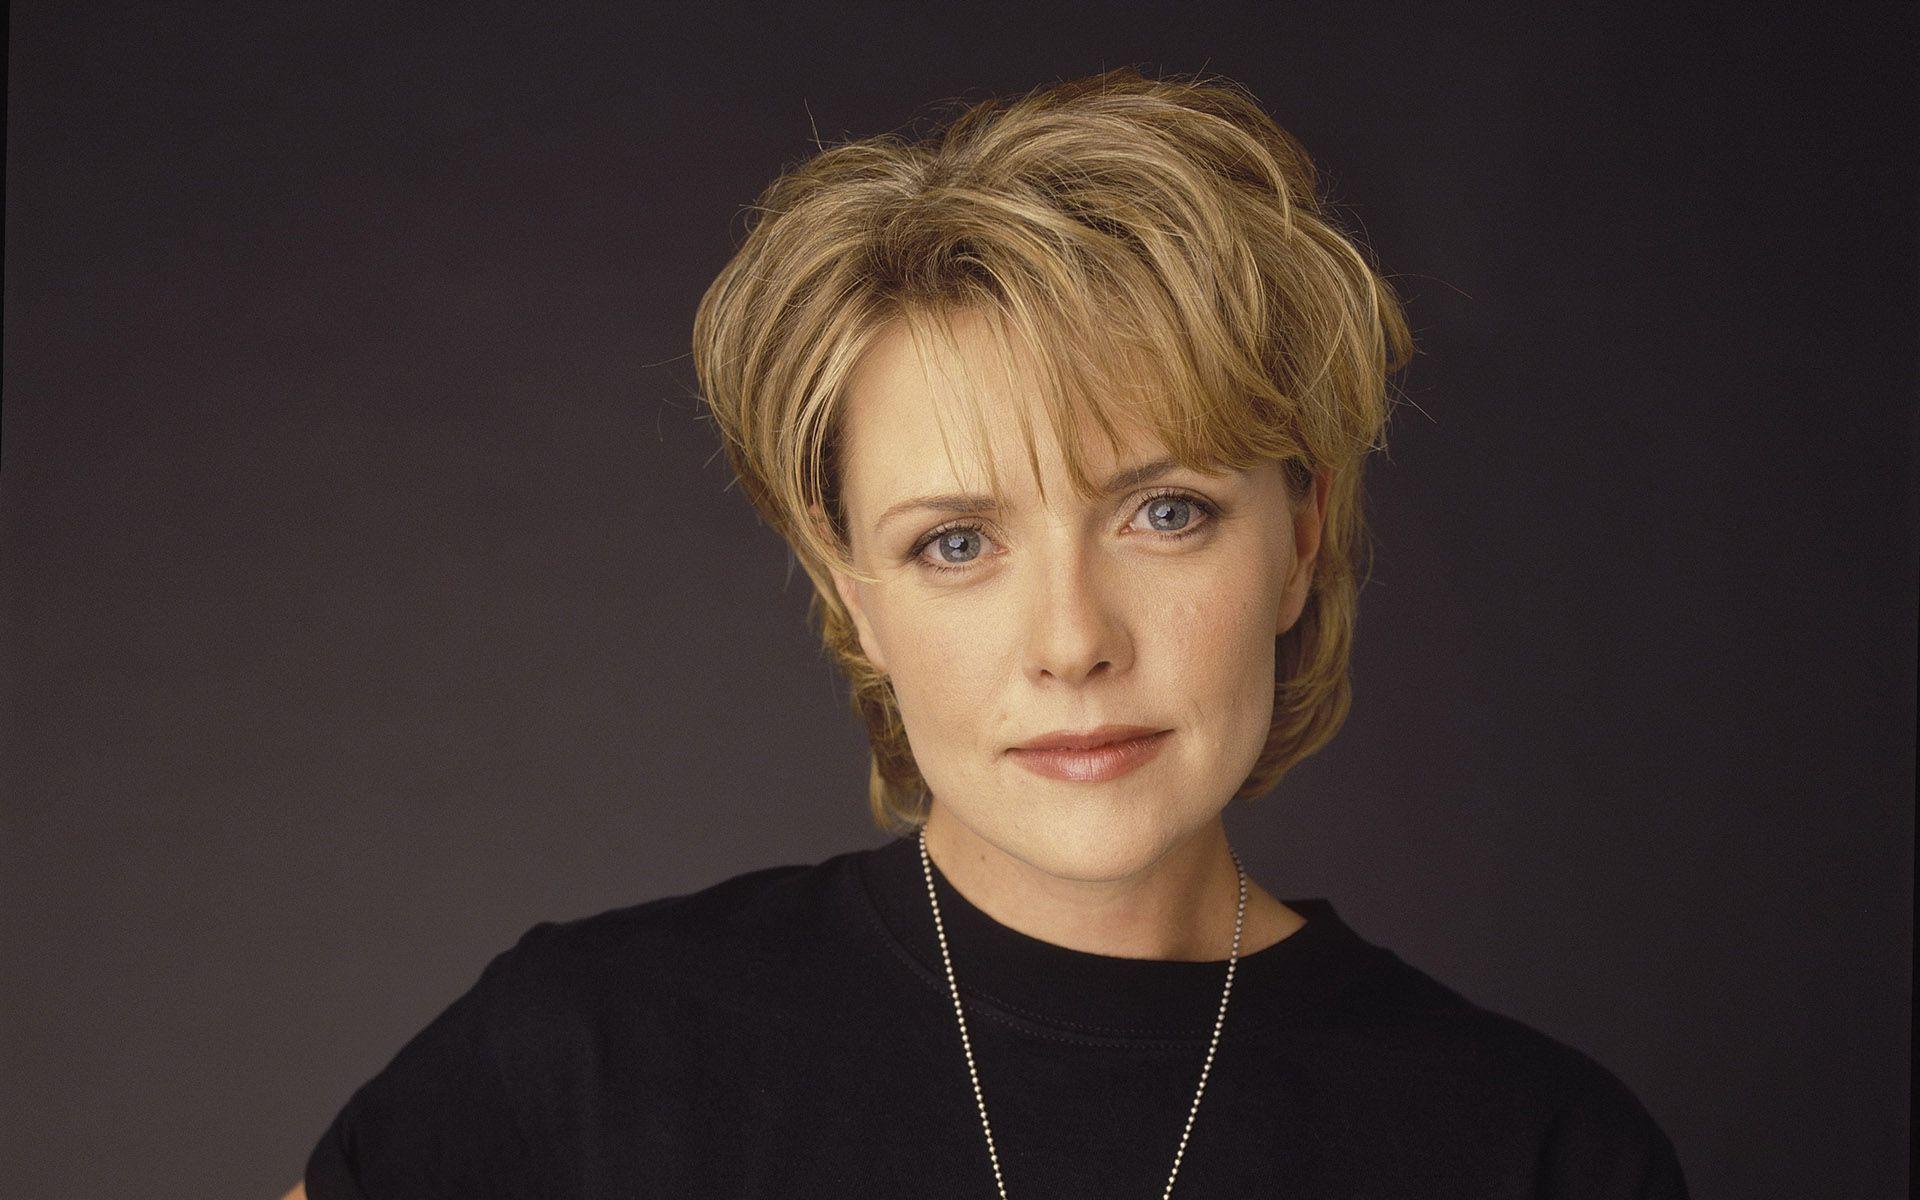 Amanda Tapping Free HD Wallpapers Image Backgrounds.